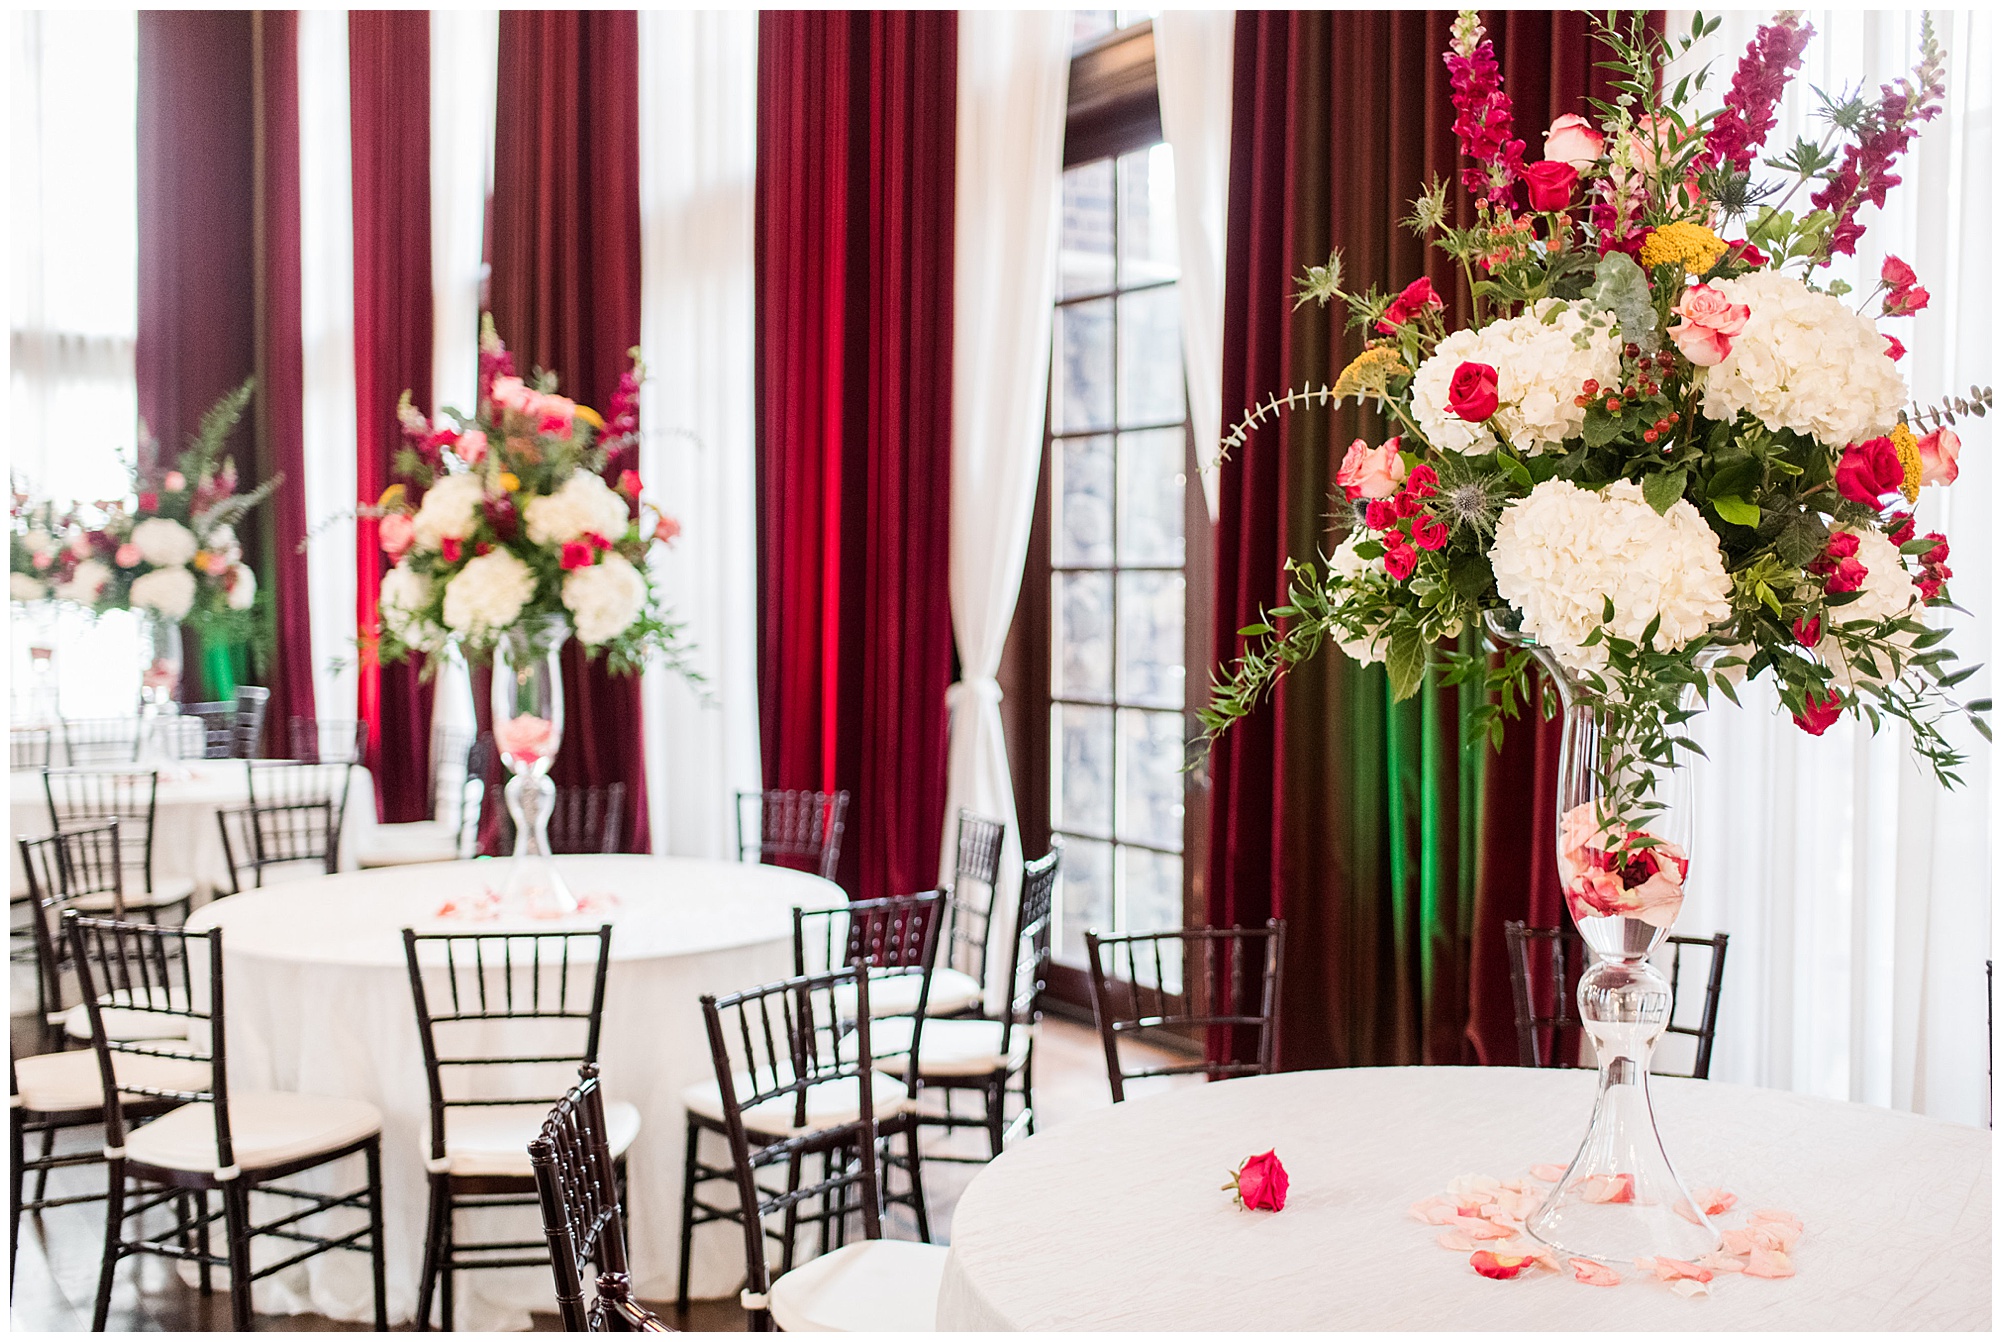 dover hall wedding reception decor. classy. colorful. pink.